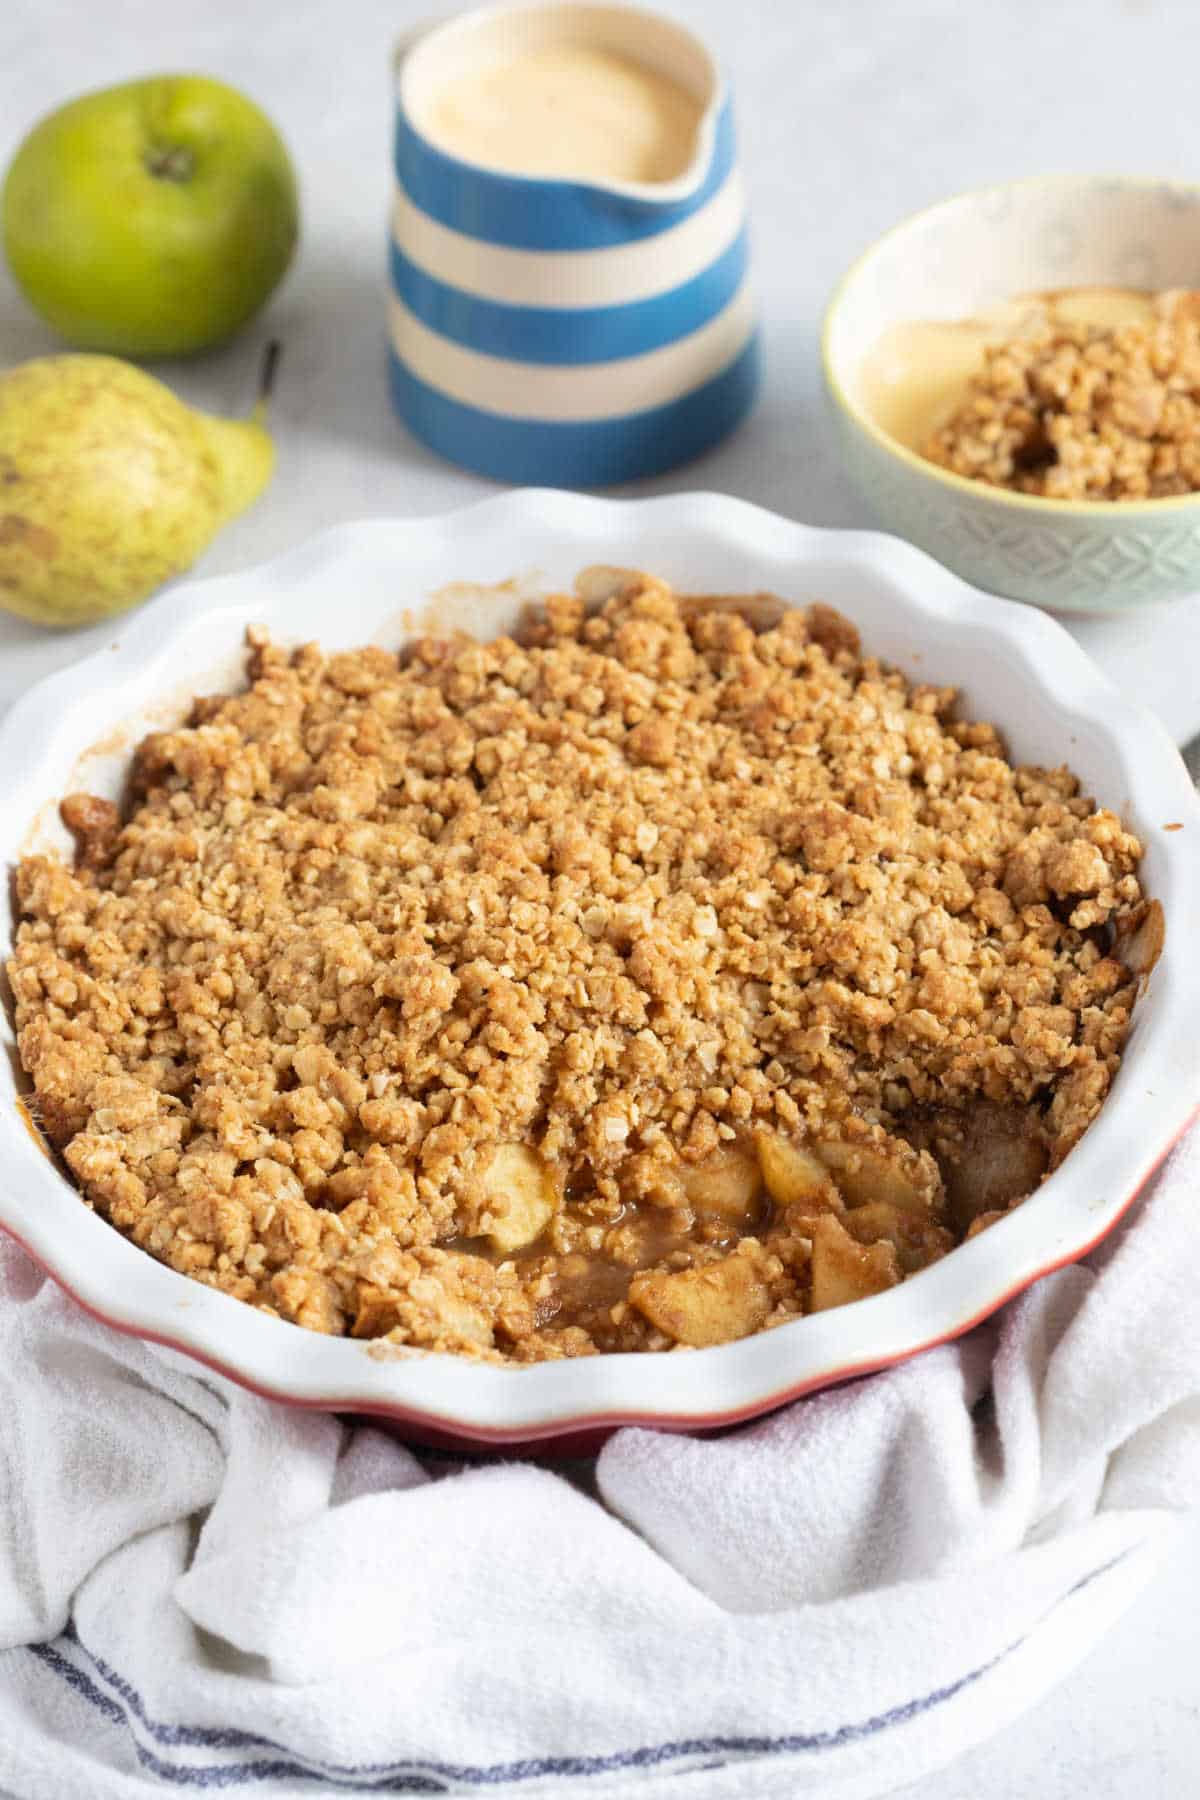 Apple and pear crumble in a red pie dish with a crispy oat topping.